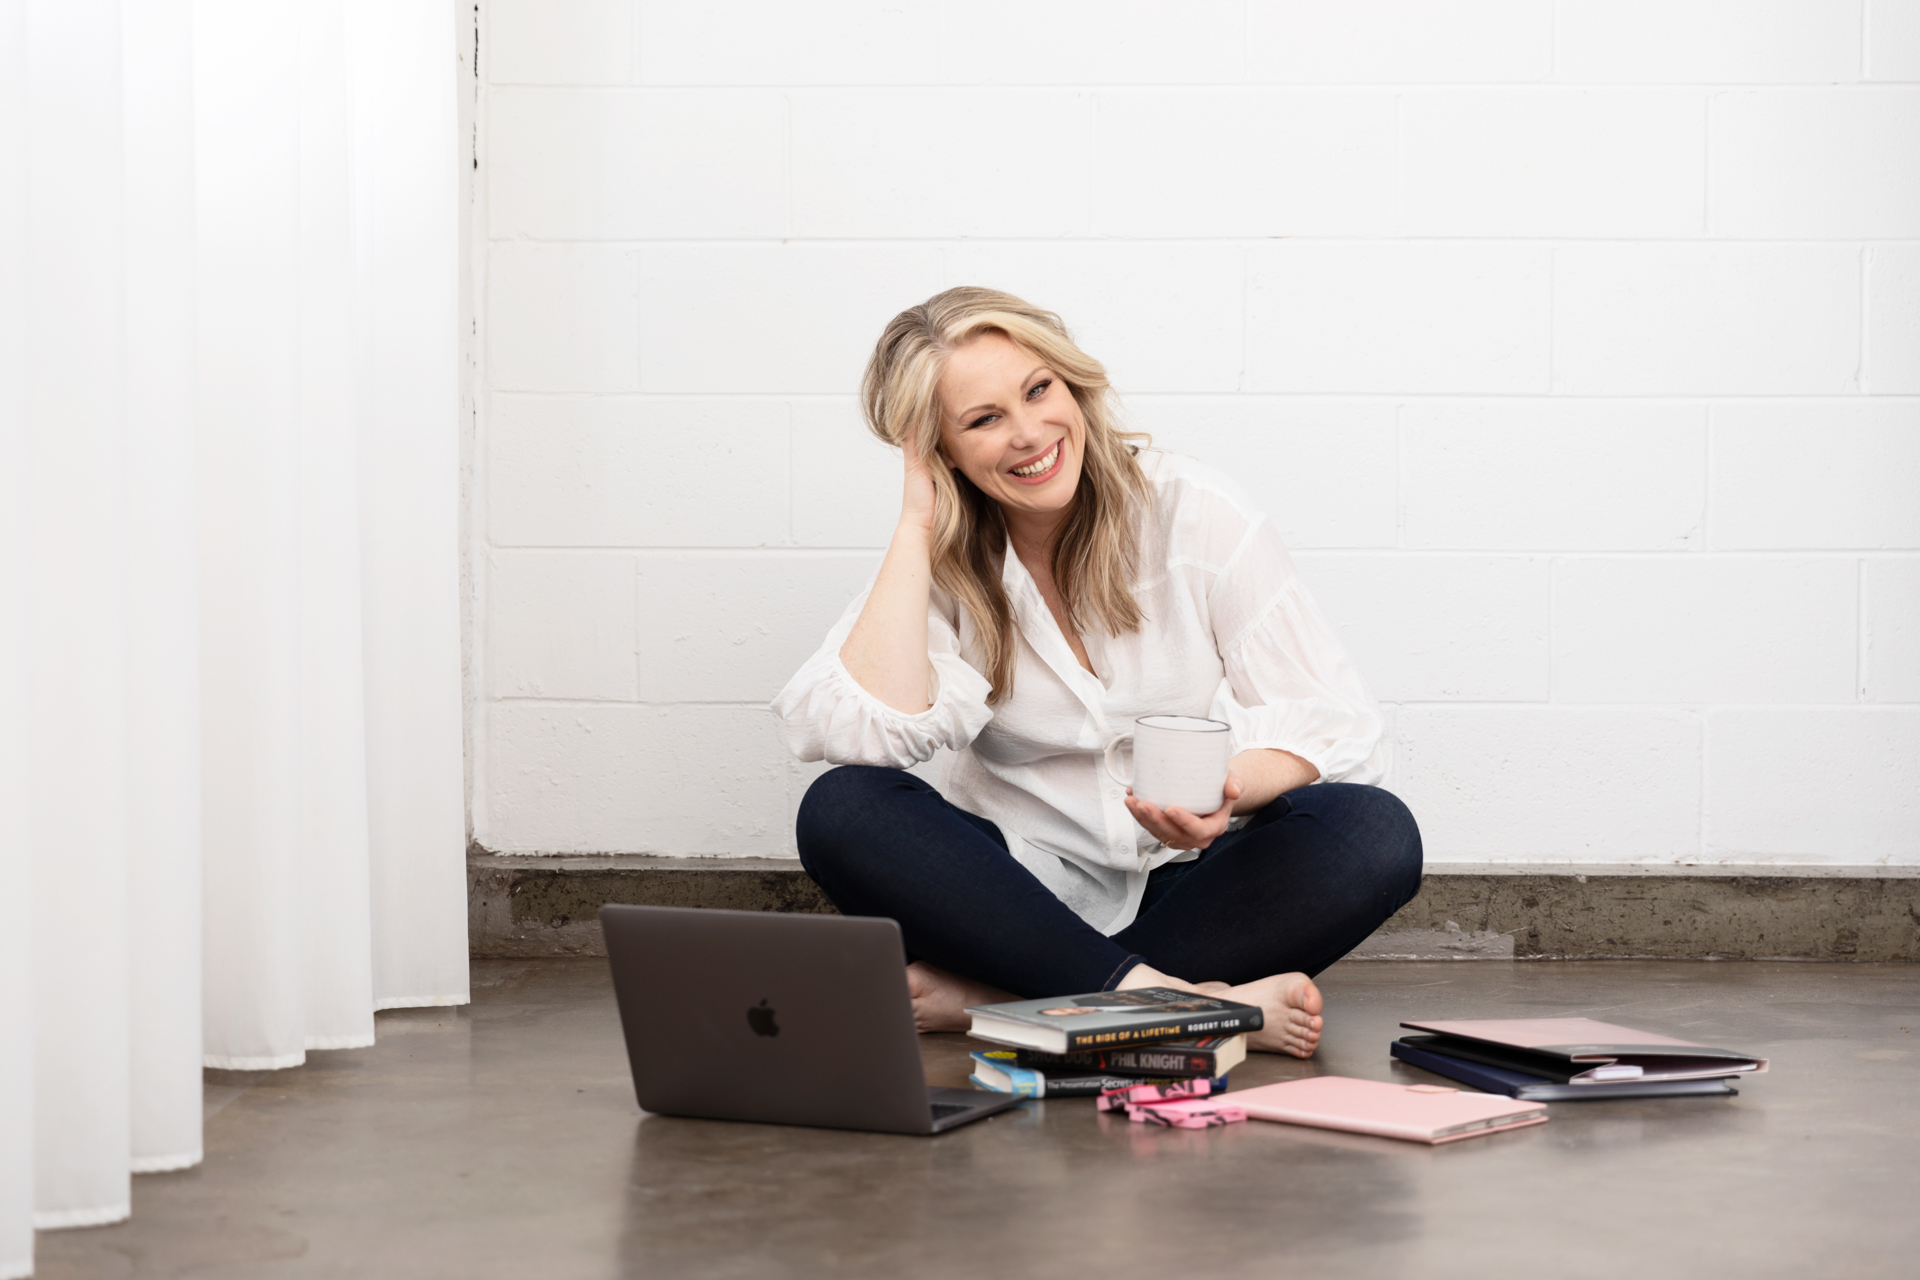 personal branding photo of a presentation coach sitting on the floor holding a cup and doing work on a laptop